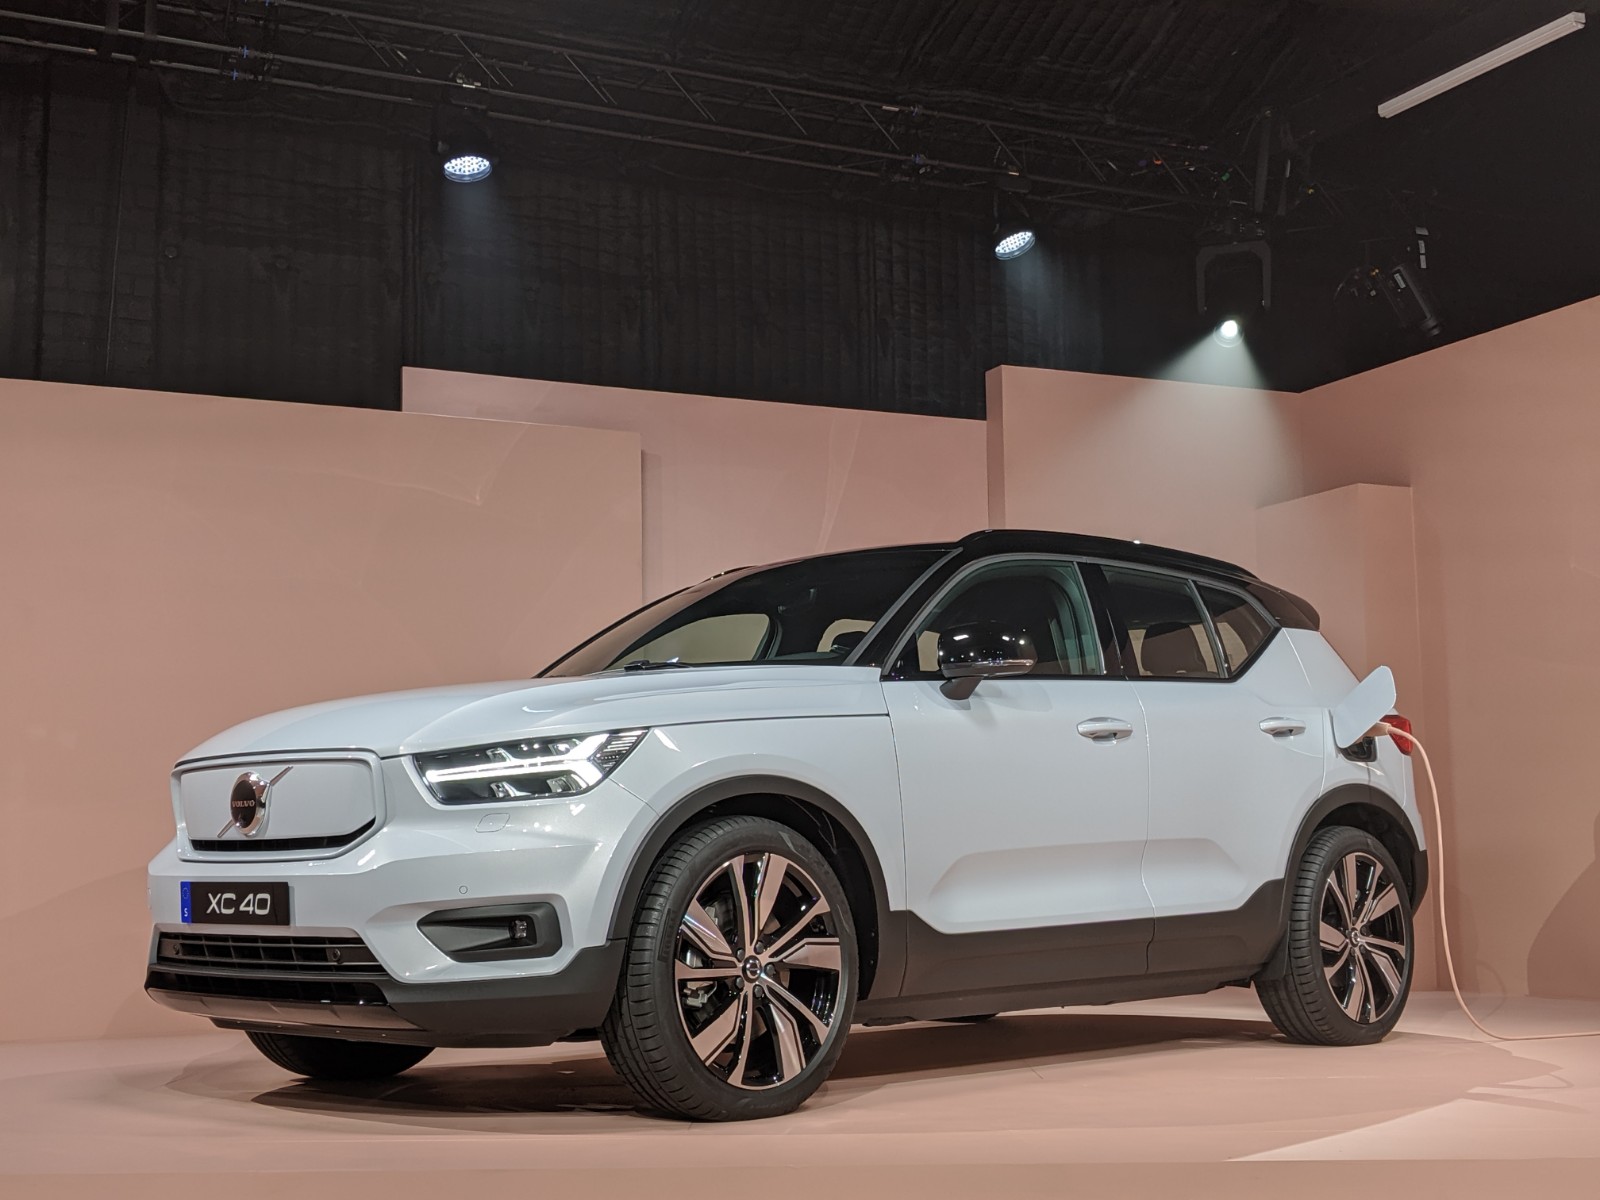 The XC40 Recharge is Volvo's first electric car, and it is a Nordic beauty